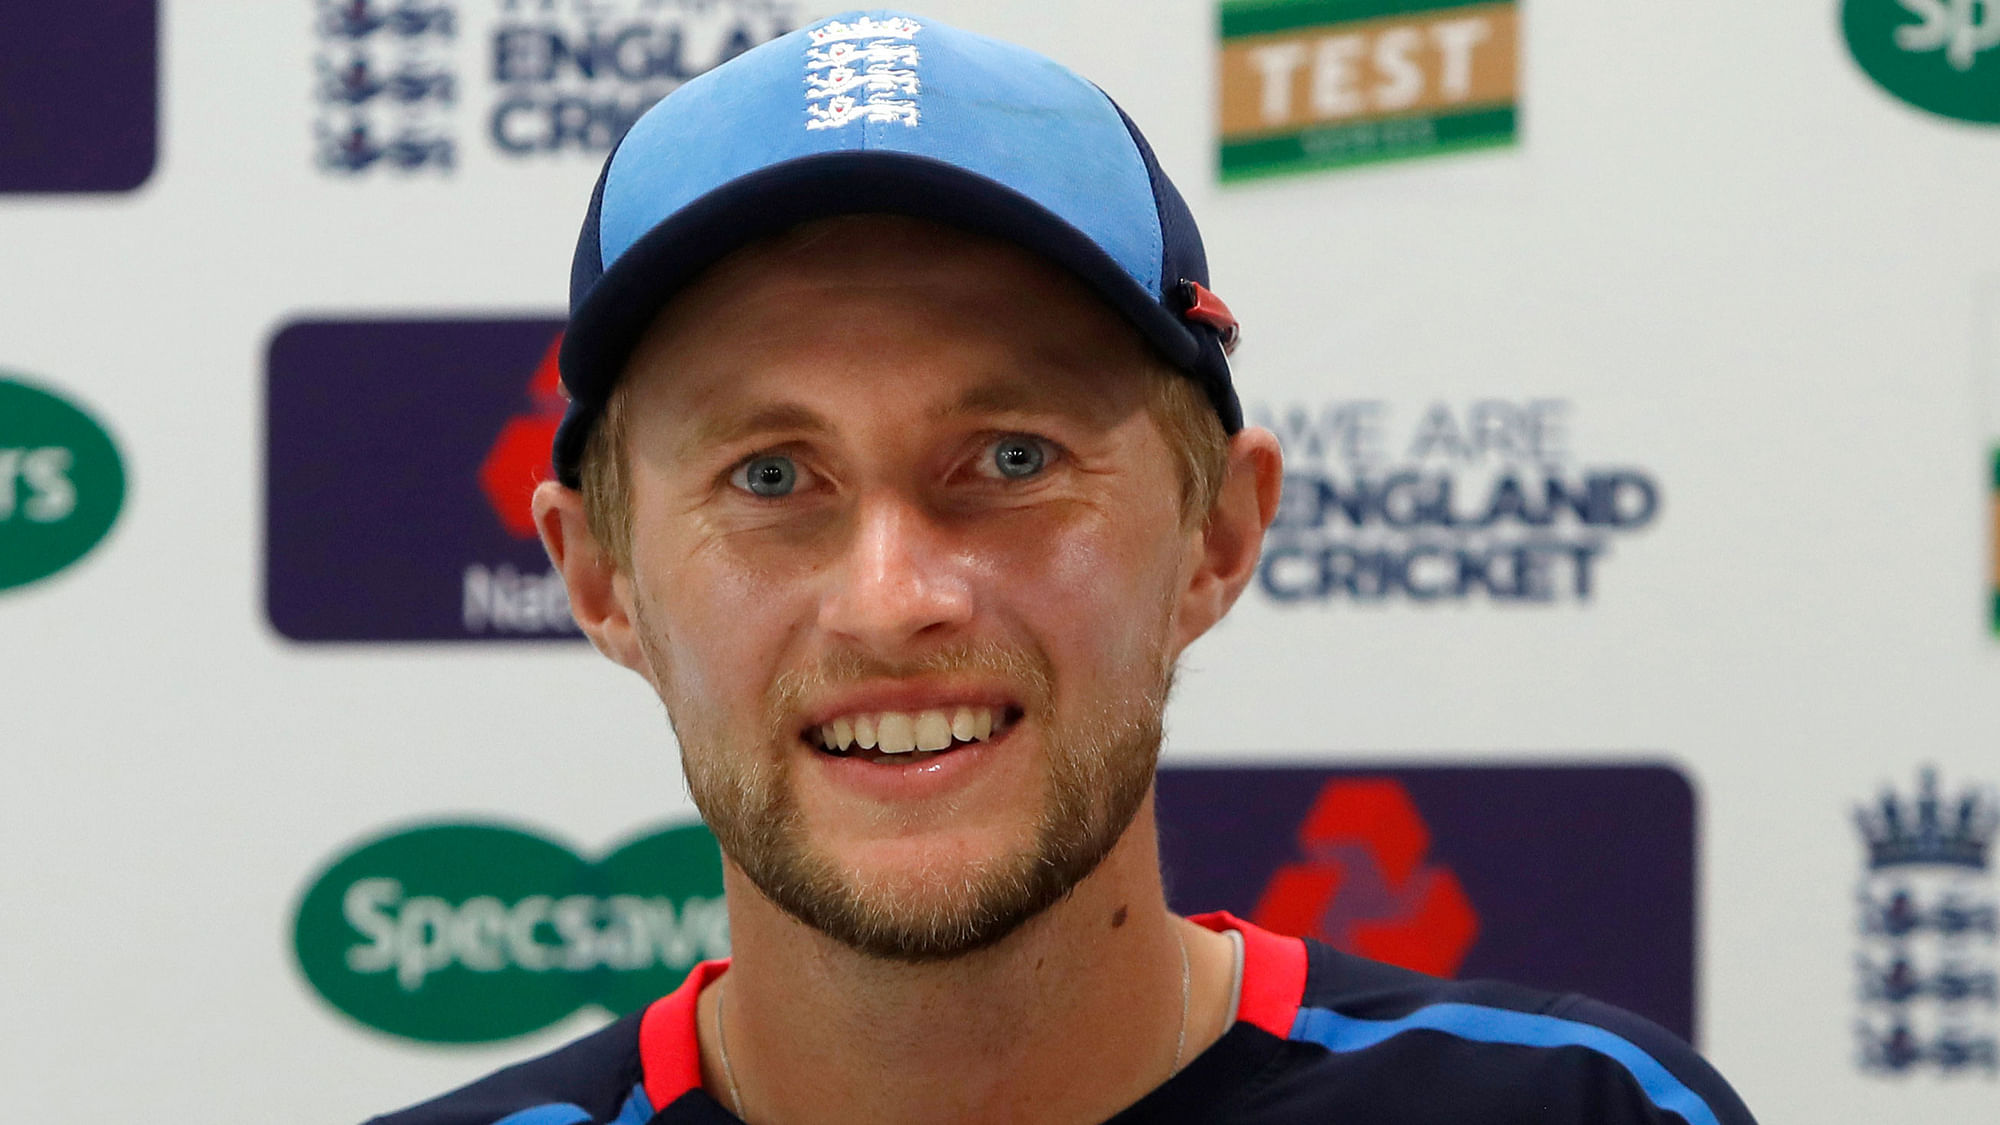 India captain Virat Kohli is the most complete cricketer across formats, England Test captain Joe Root has said.